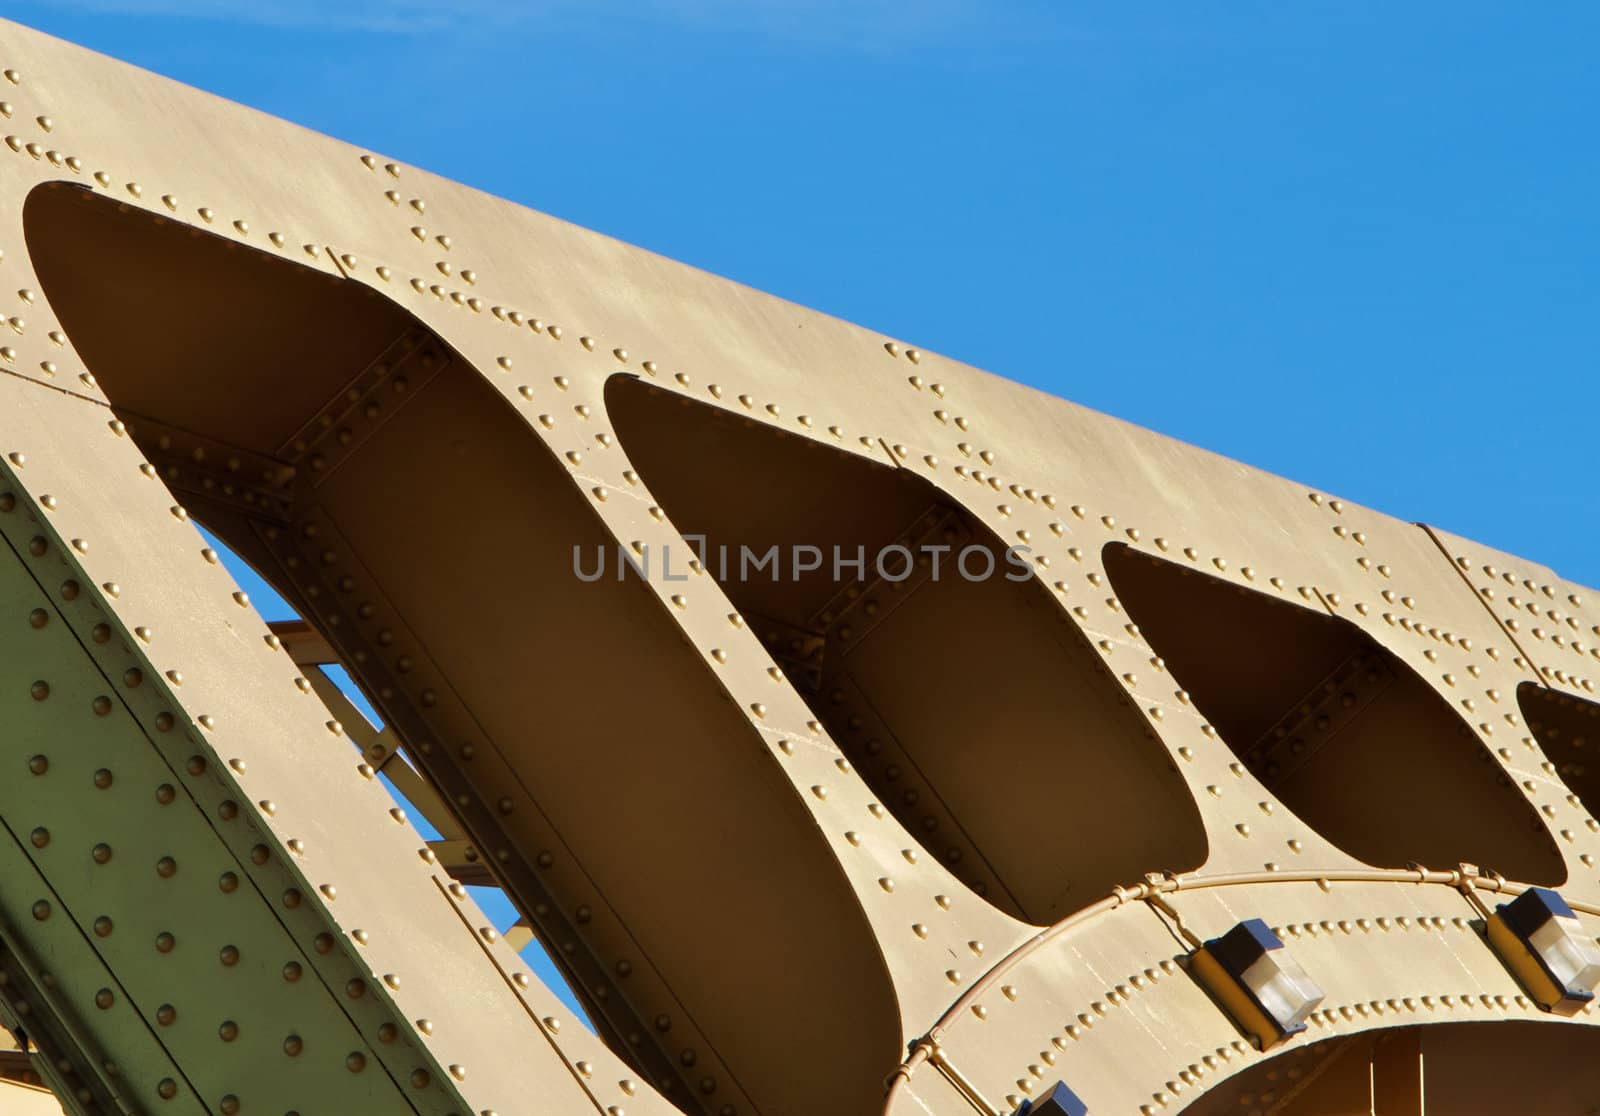 Old style Gold painted steel beam and girders in an abstract view of Sacramento Tower Bridge